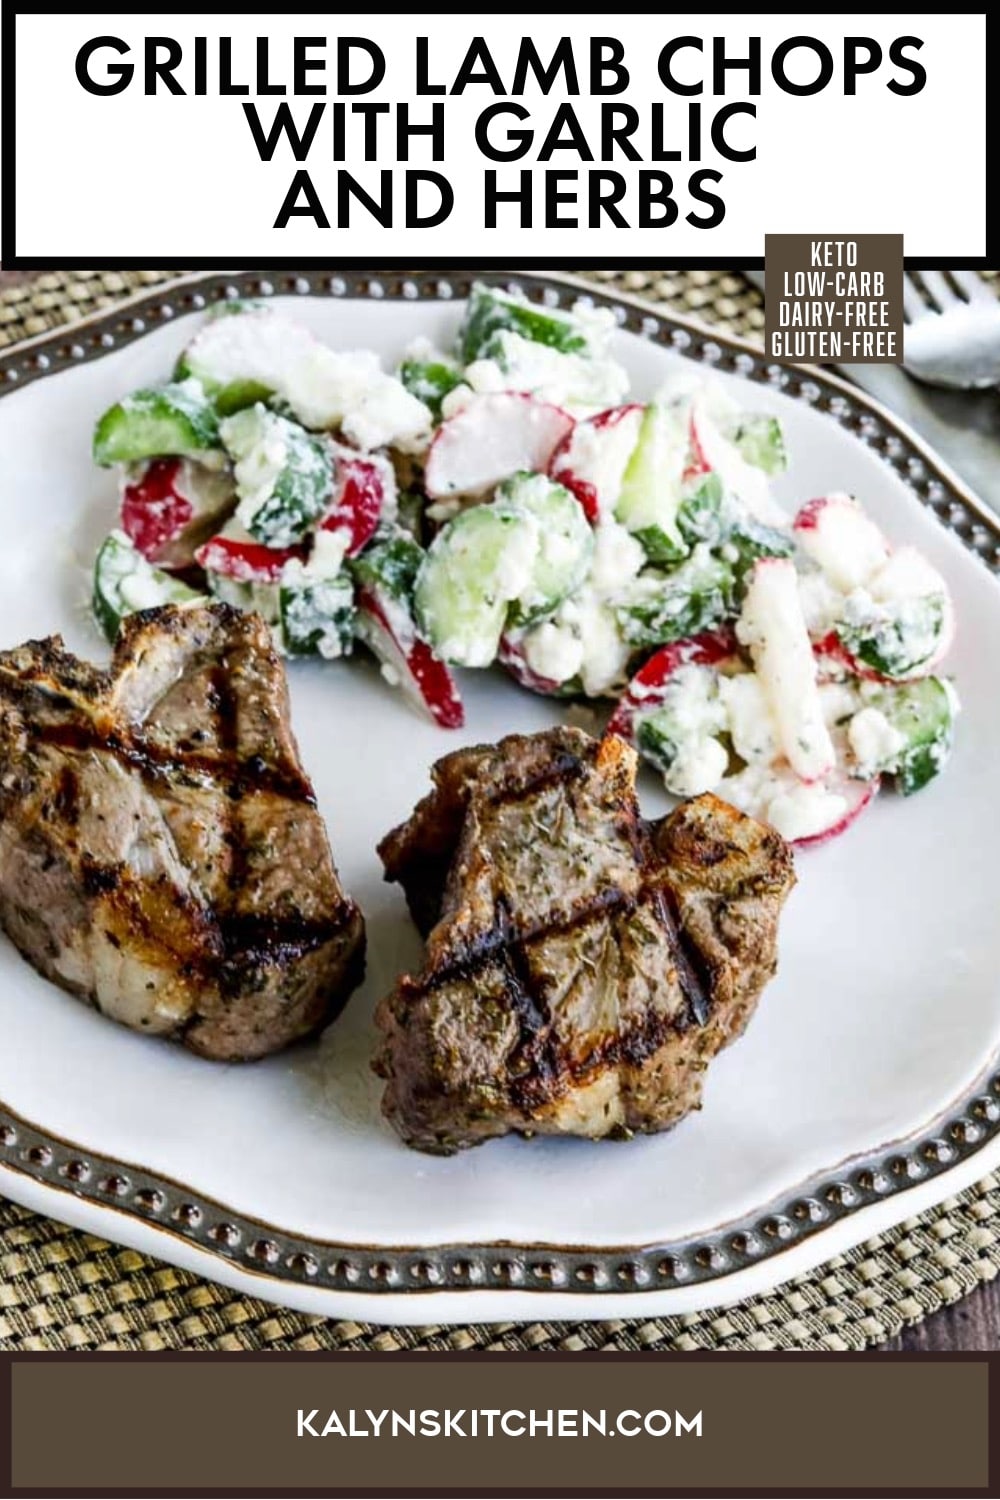 Pinterest image of Grilled Lamb Chops with Garlic and Herbs